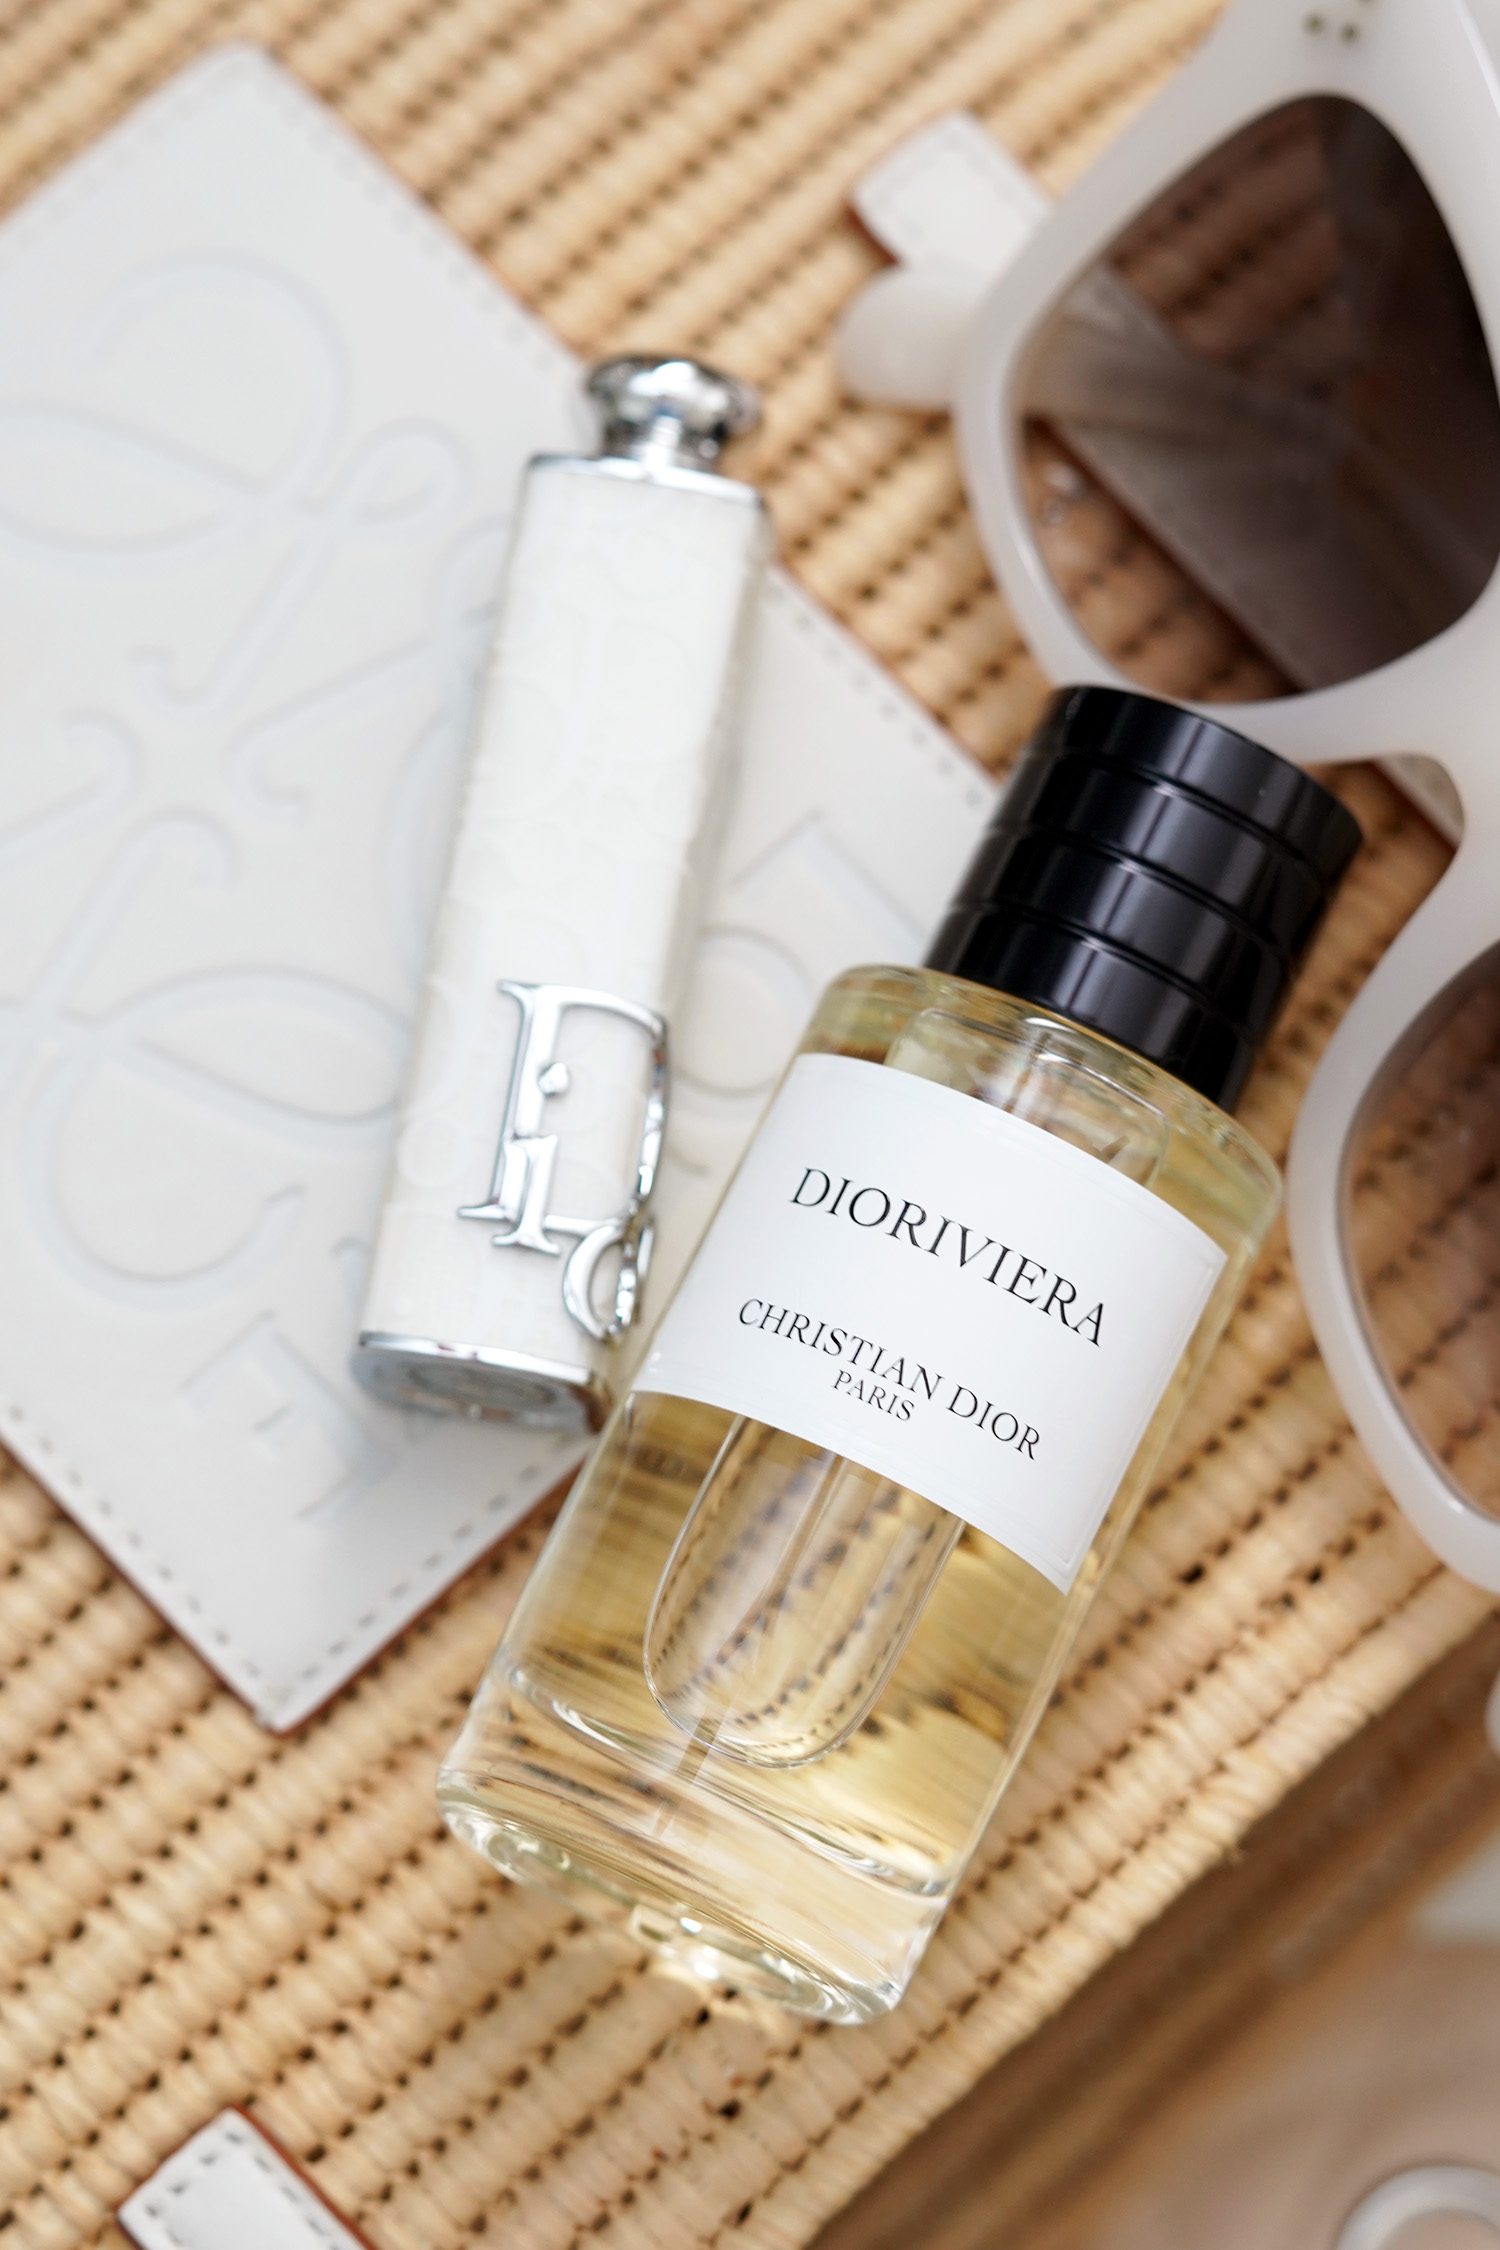 Dior, Diptyque, and More New Perfumes To Try This Season